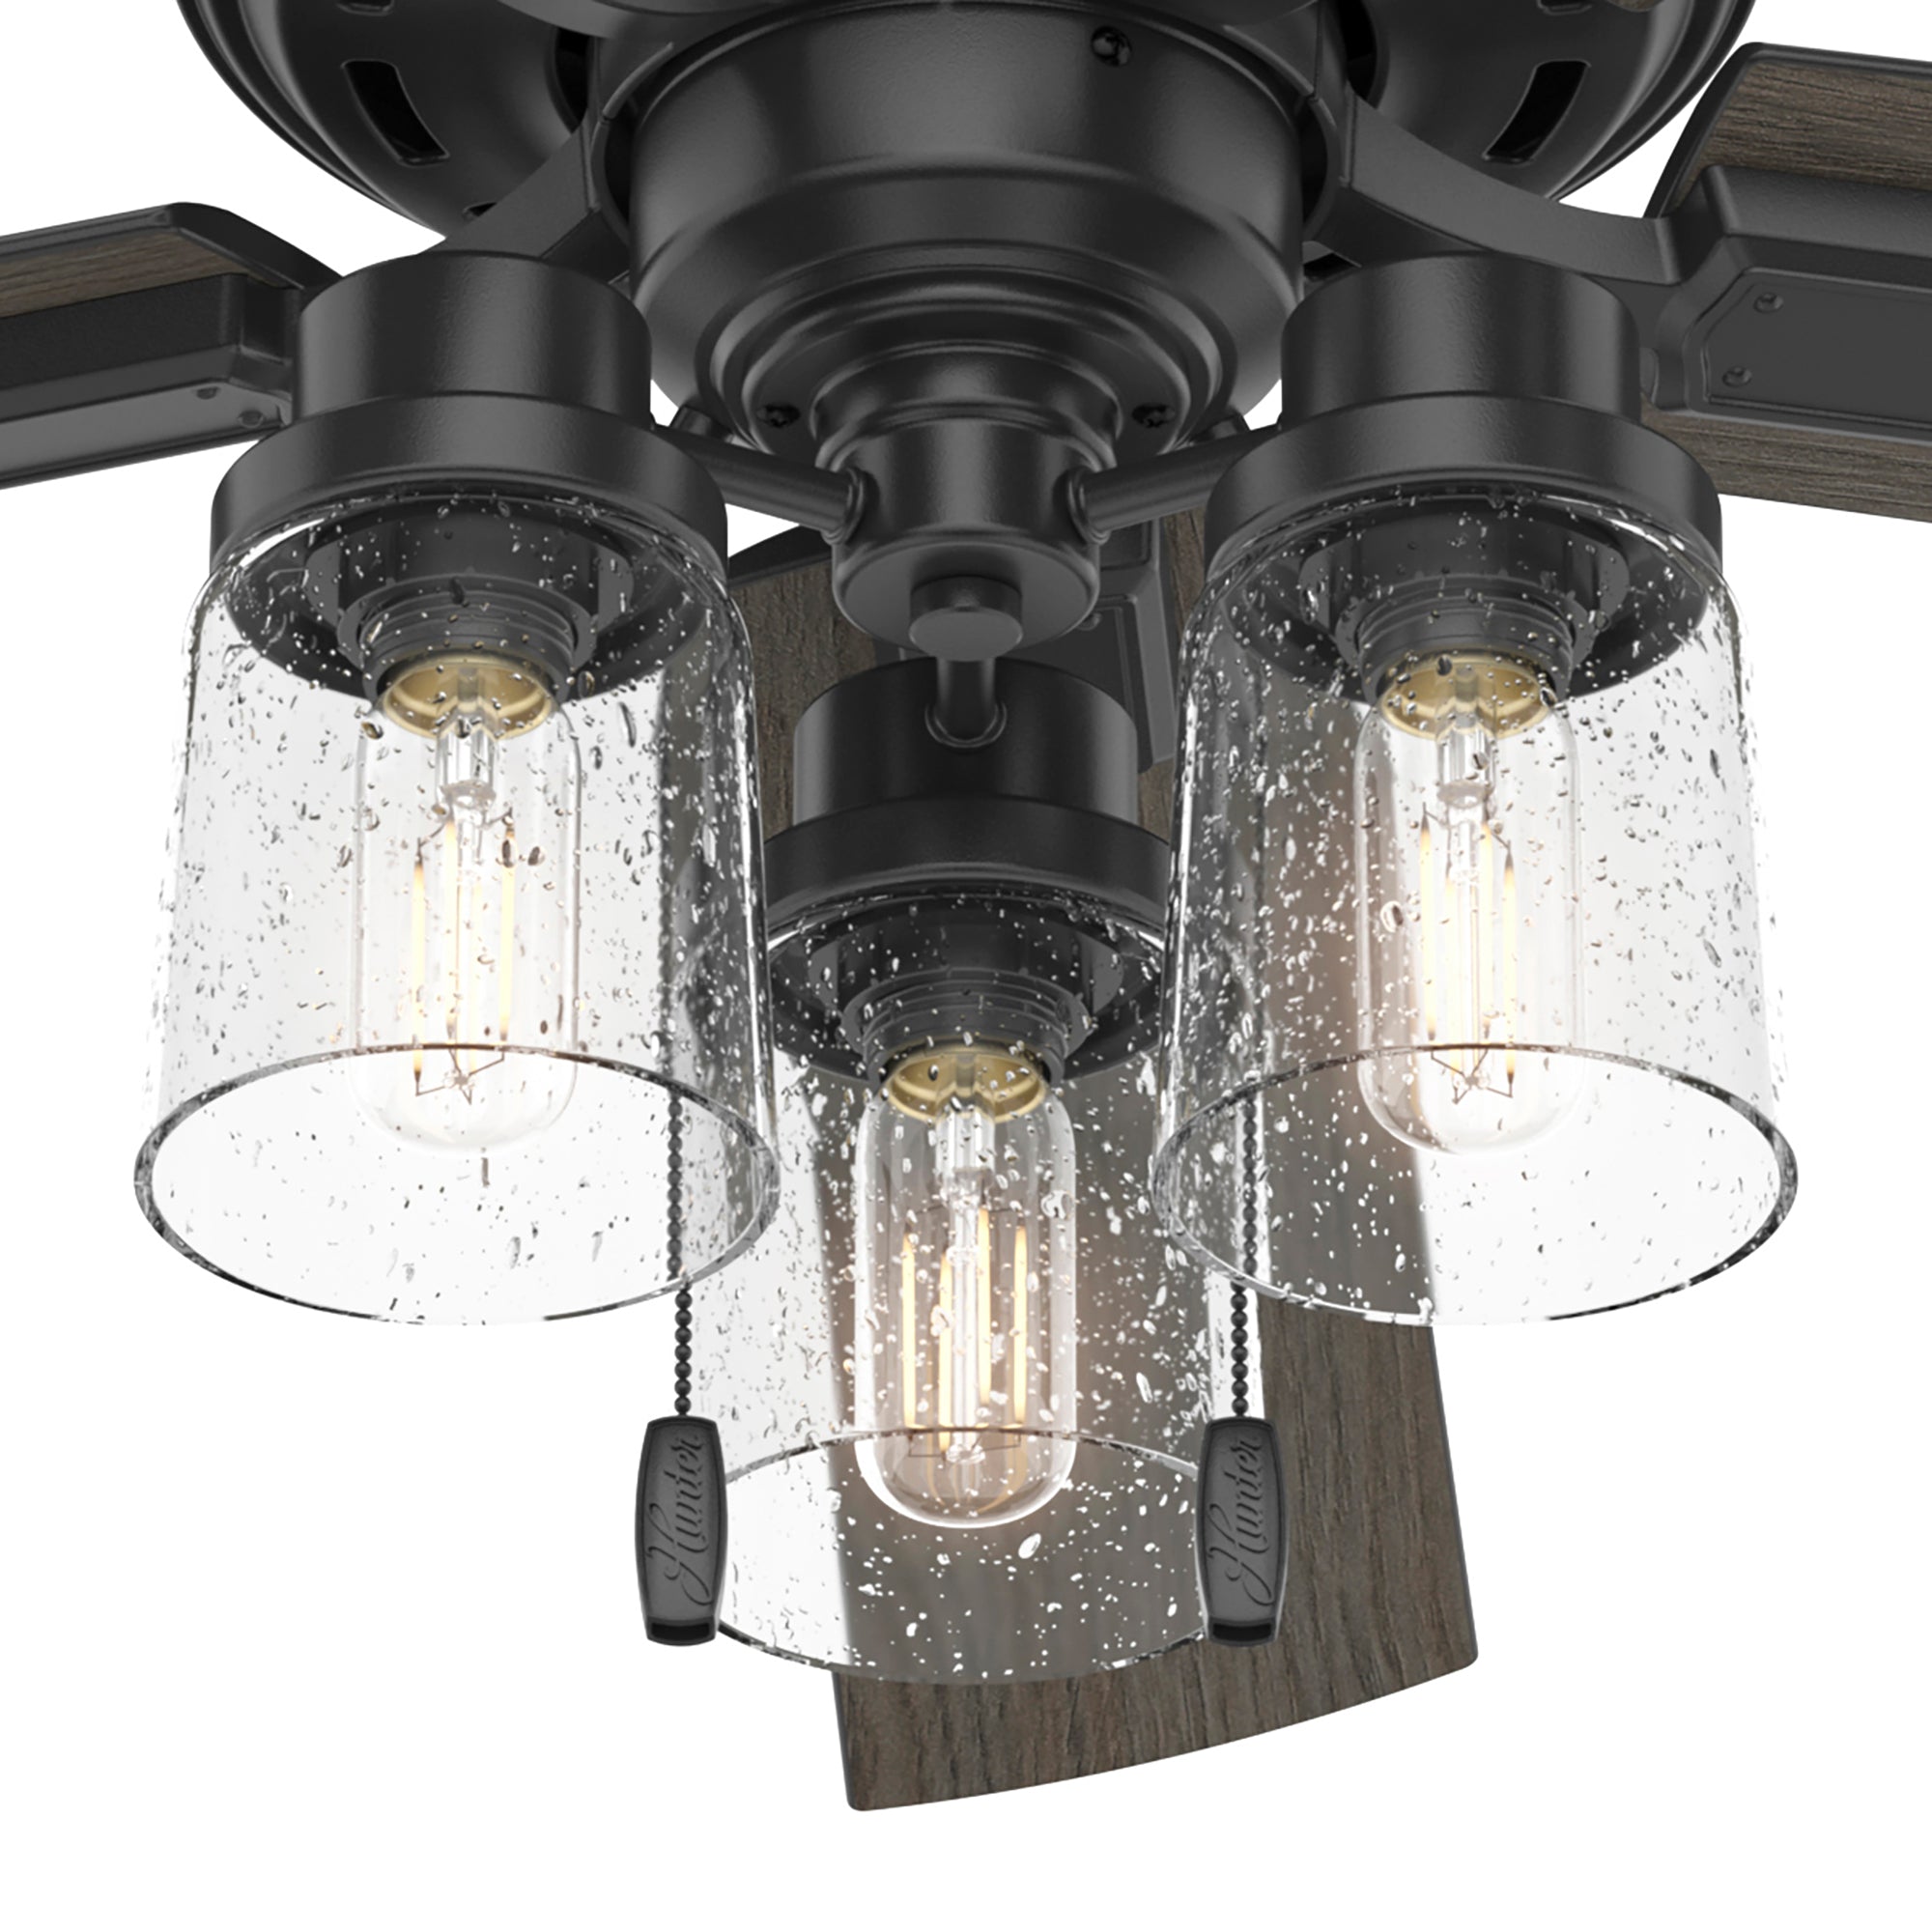 Hunter 52 inch Hartland Ceiling Fan with LED Light Kit and Pull Chain